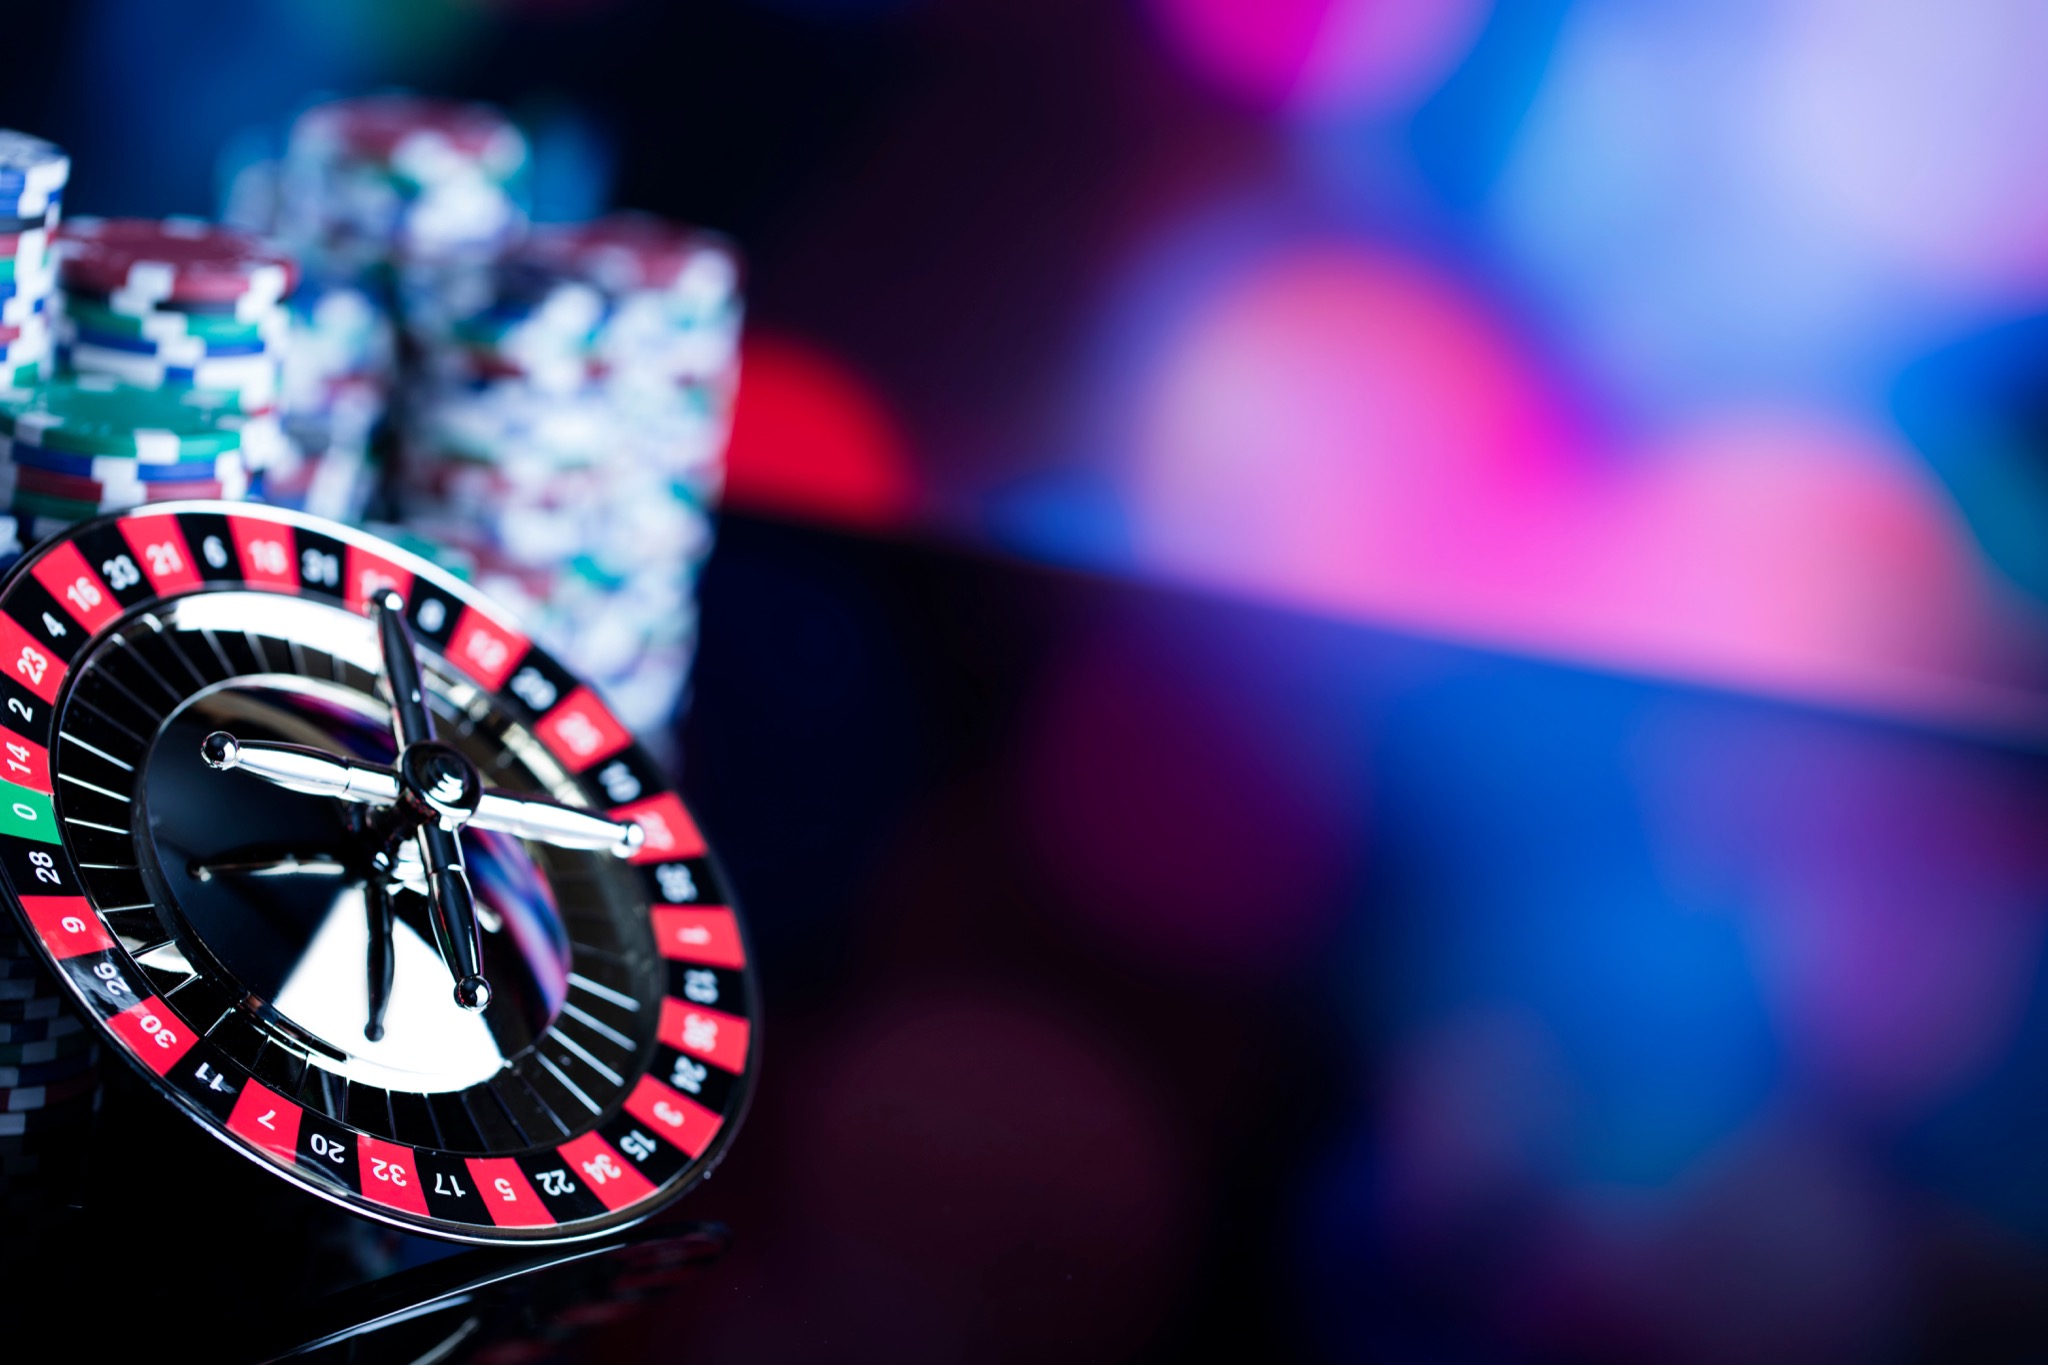 A thrilling game of roulette at an online casino